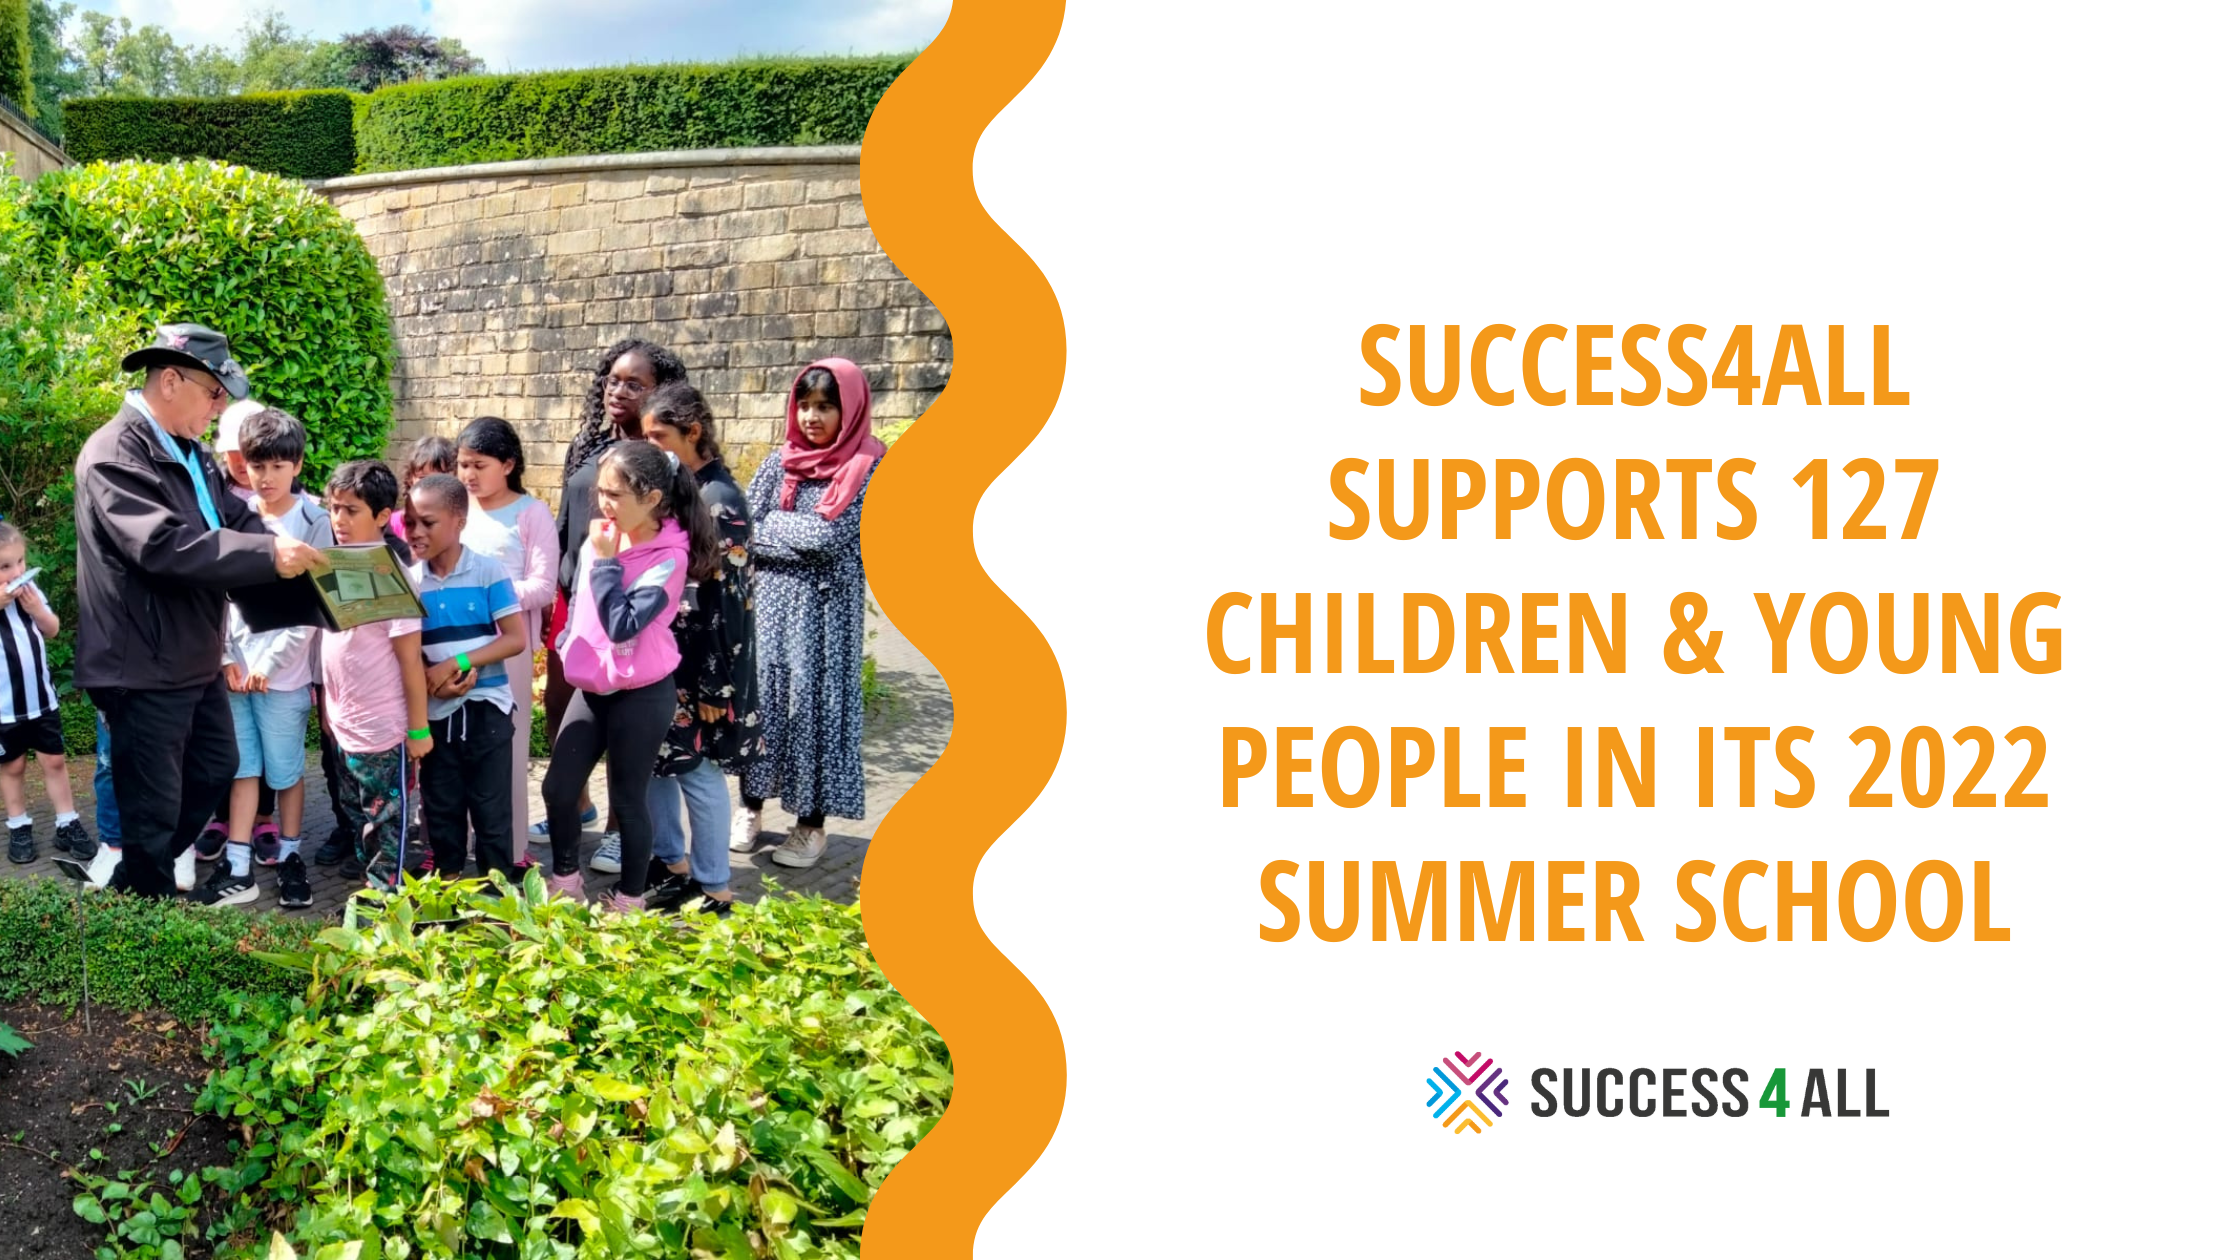 Young people from Success4All's free Summer School visit Alnwick garden.